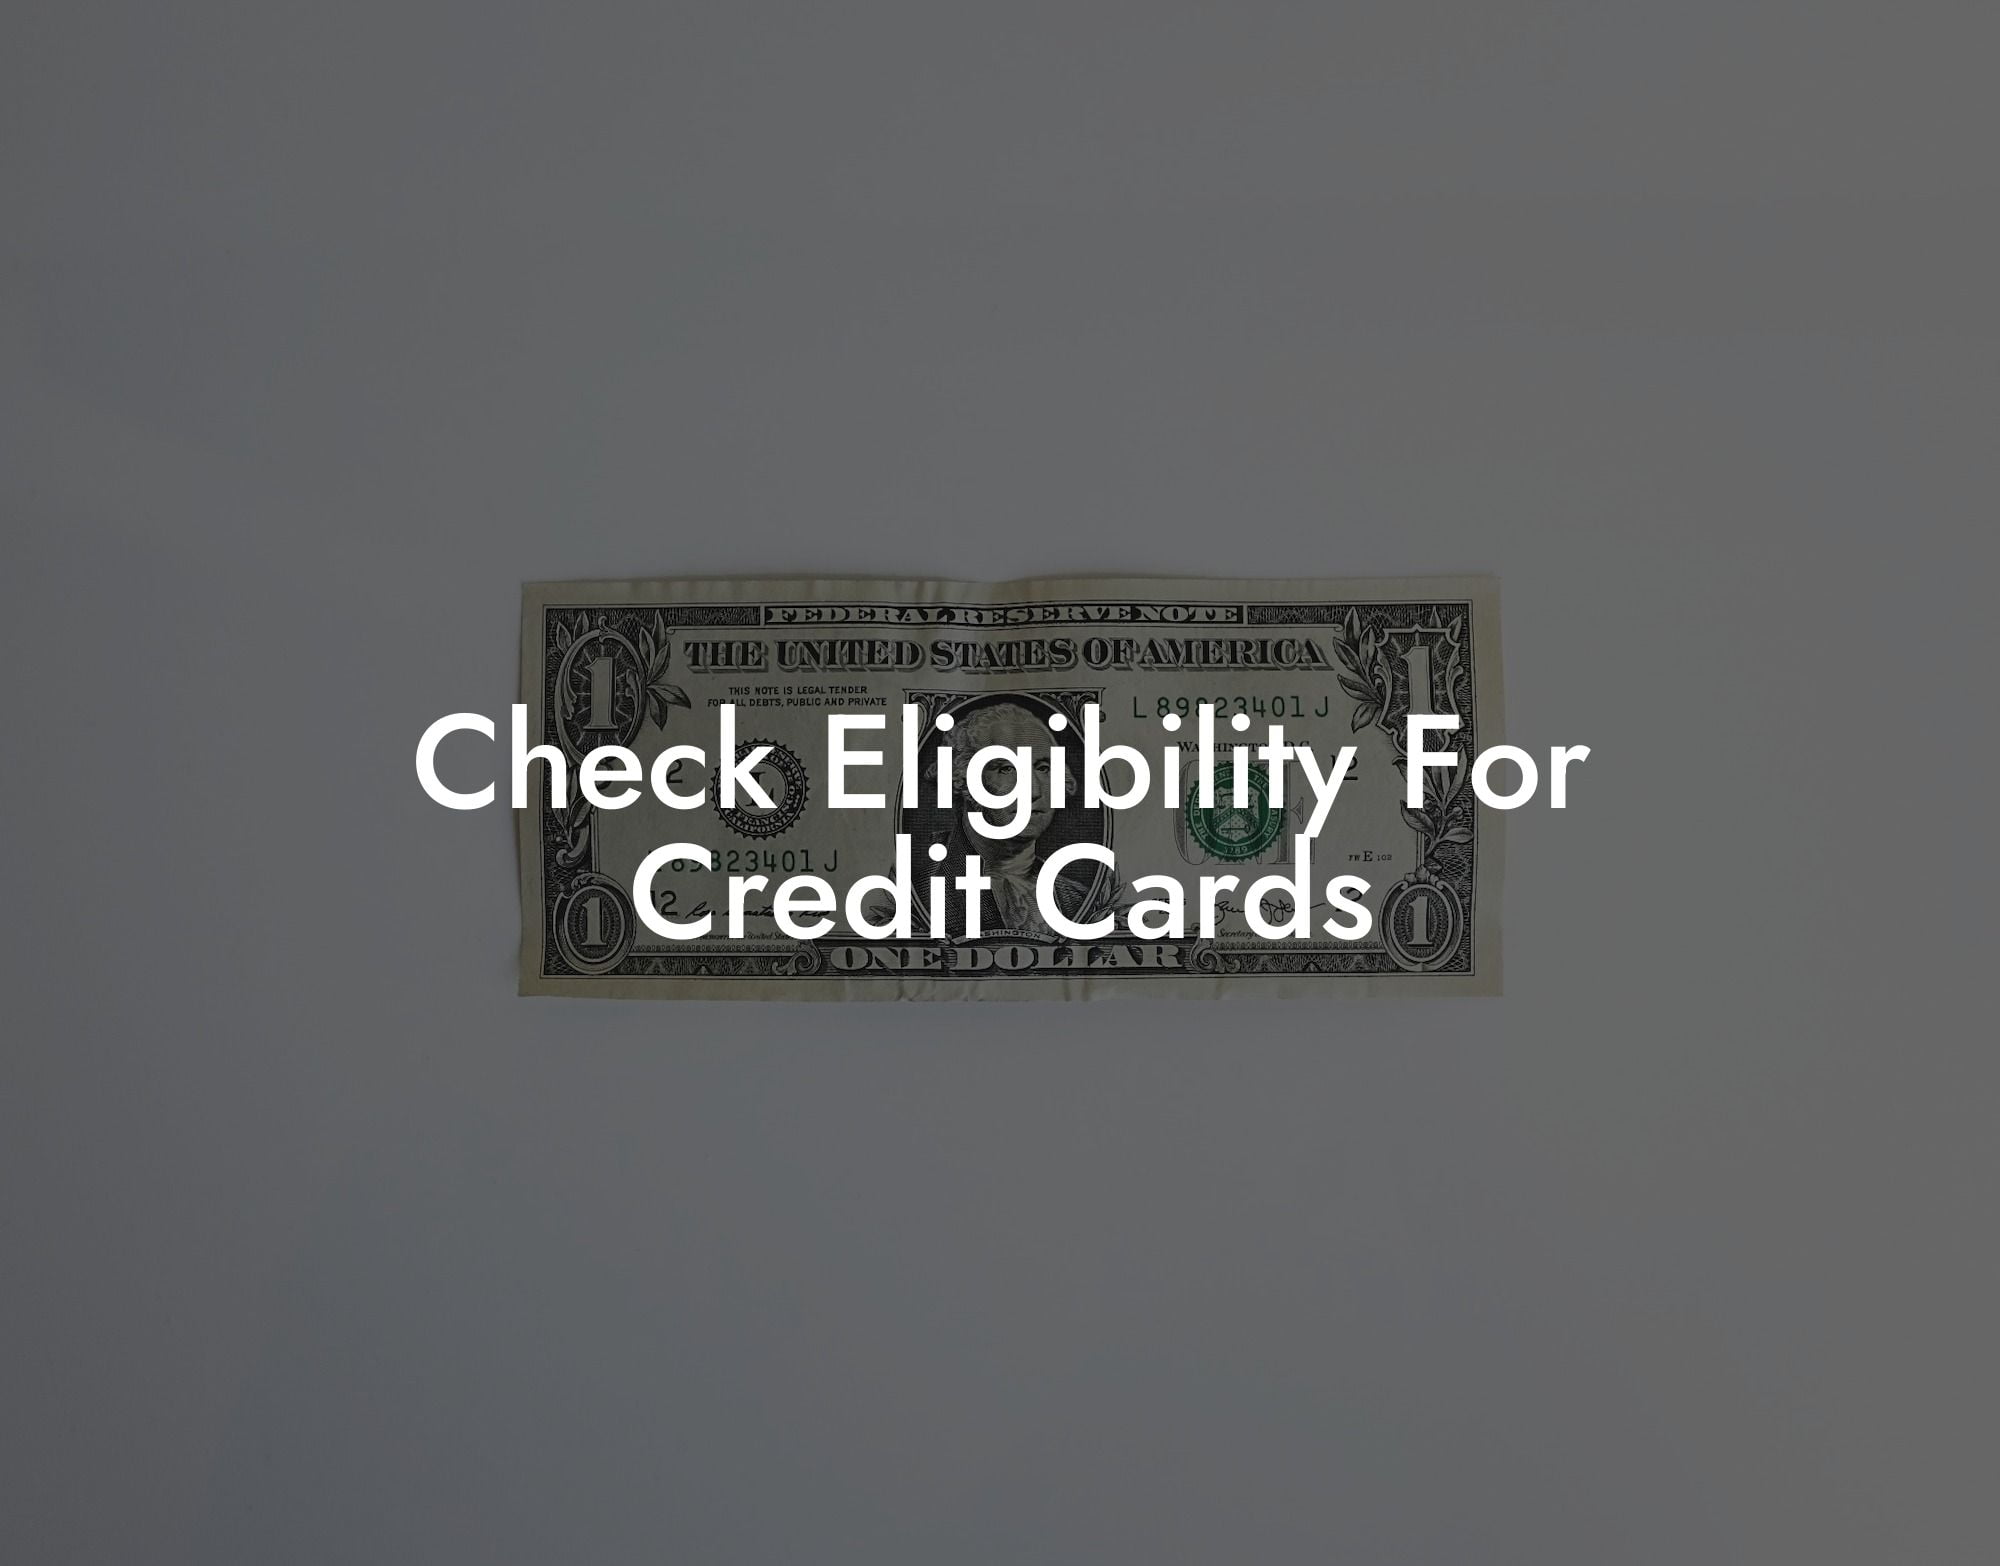 Check Eligibility For Credit Cards